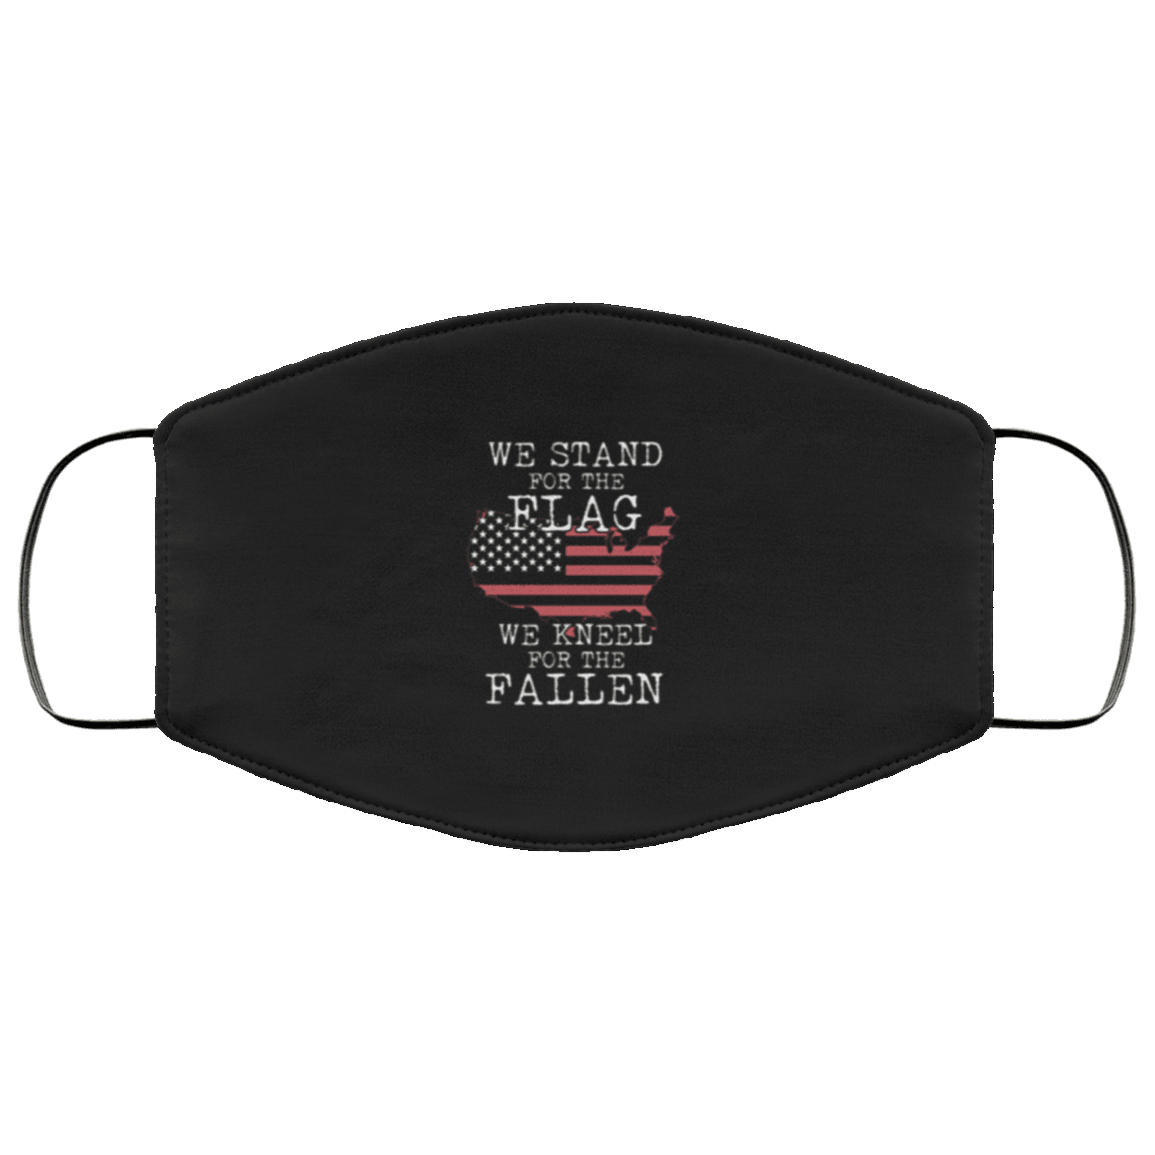 Designs by MyUtopia Shout Out:Stand For The Flag Kneel For The Fallen Adult Fabric Face Mask with Elastic Ear Loops,3 Layer Fabric Face Mask / Black / Adult,Fabric Face Mask